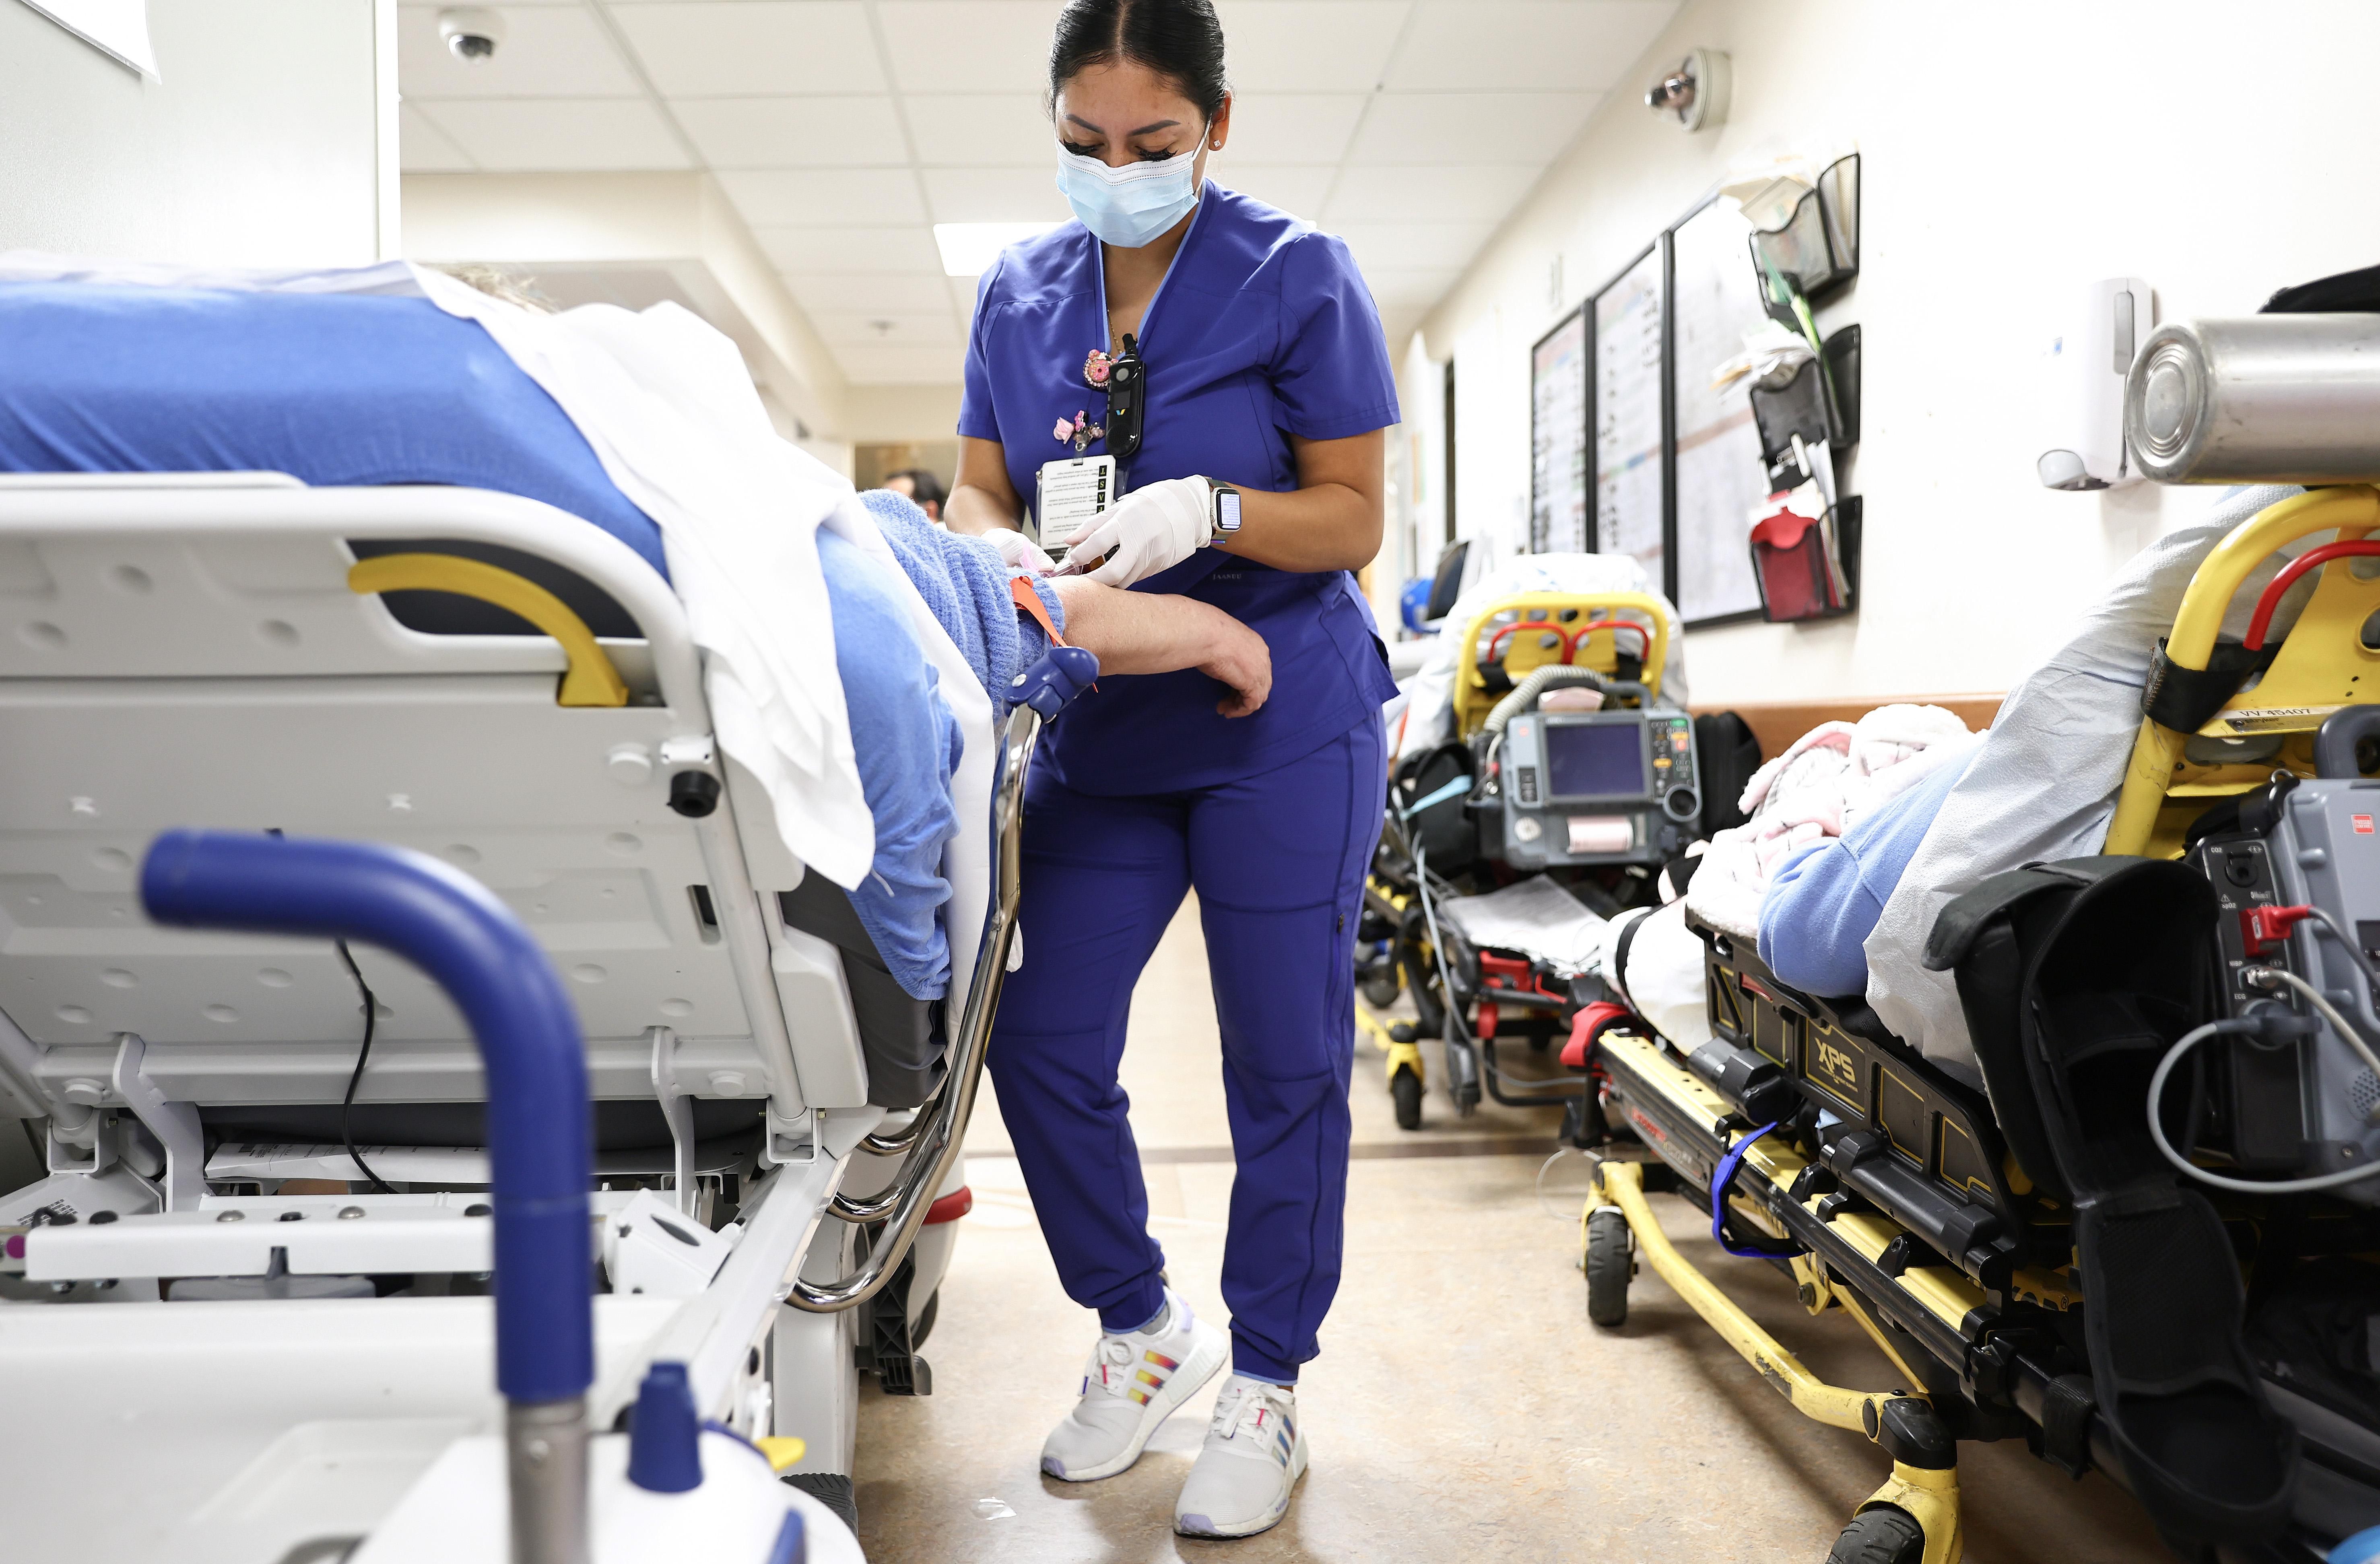 Lab technician Alejandra Sanchez cares for a patient in the emergency department at Providence St. Mary Medical Center on March 11, 2022 in Apple Valley, California.